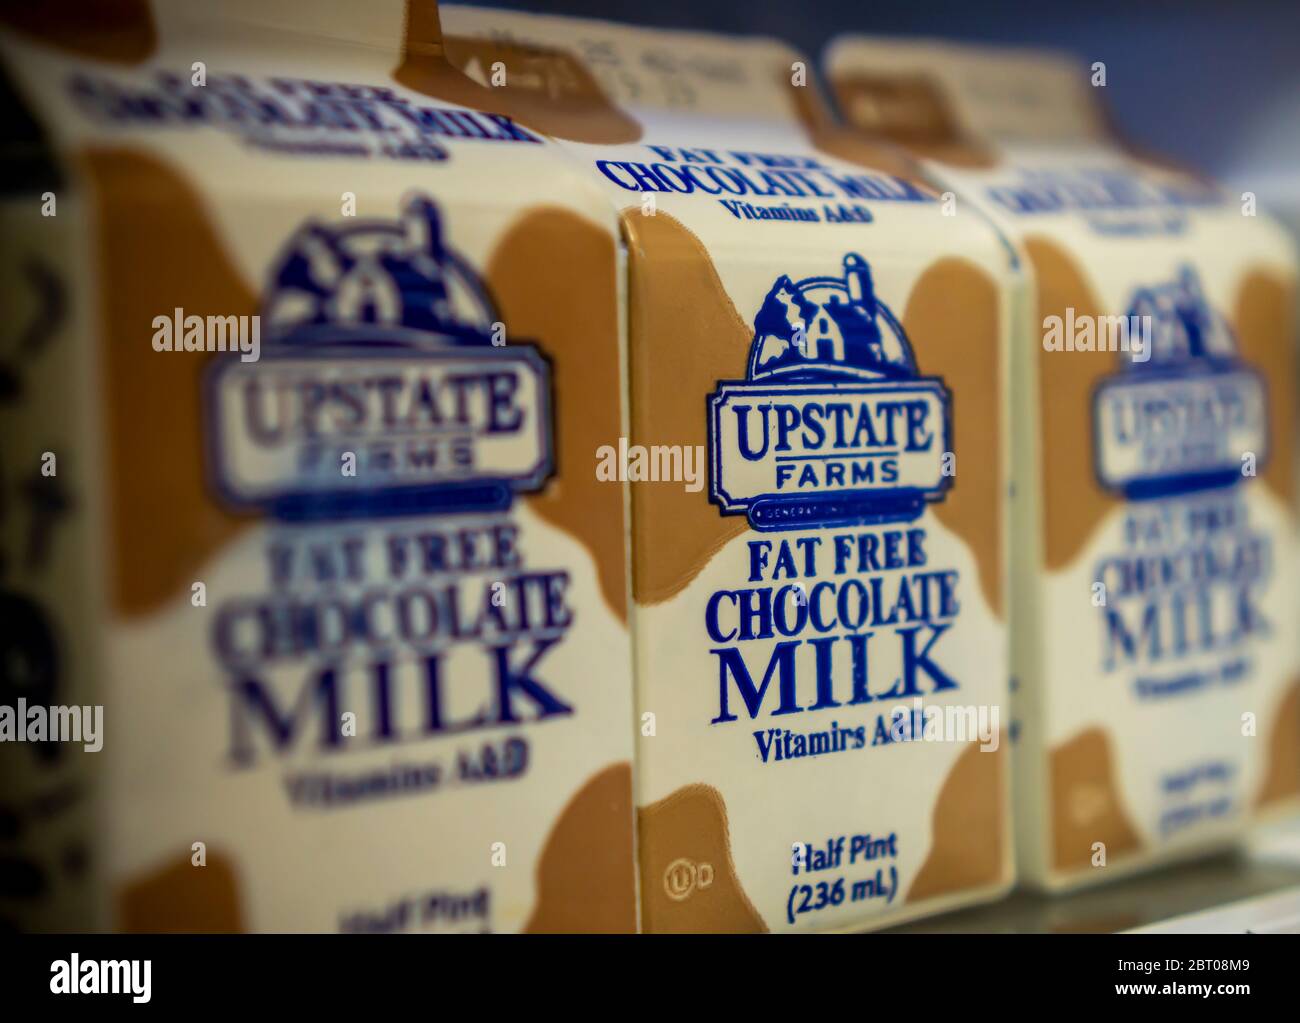 Containers of Upstate Farms brand fat free chocolate milk in a refrigerator in New York on Thursday, May 14, 2020. Upstate Farms is a member of the Upstate Niagara Cooperative. New York Sate is partnering with Upstate Niagara Cooperative and other New York producers of dairy products to process excess milk and distribute the products to local food banks, otherwise milk would be discarded.  (© Richard B. Levine) Stock Photo